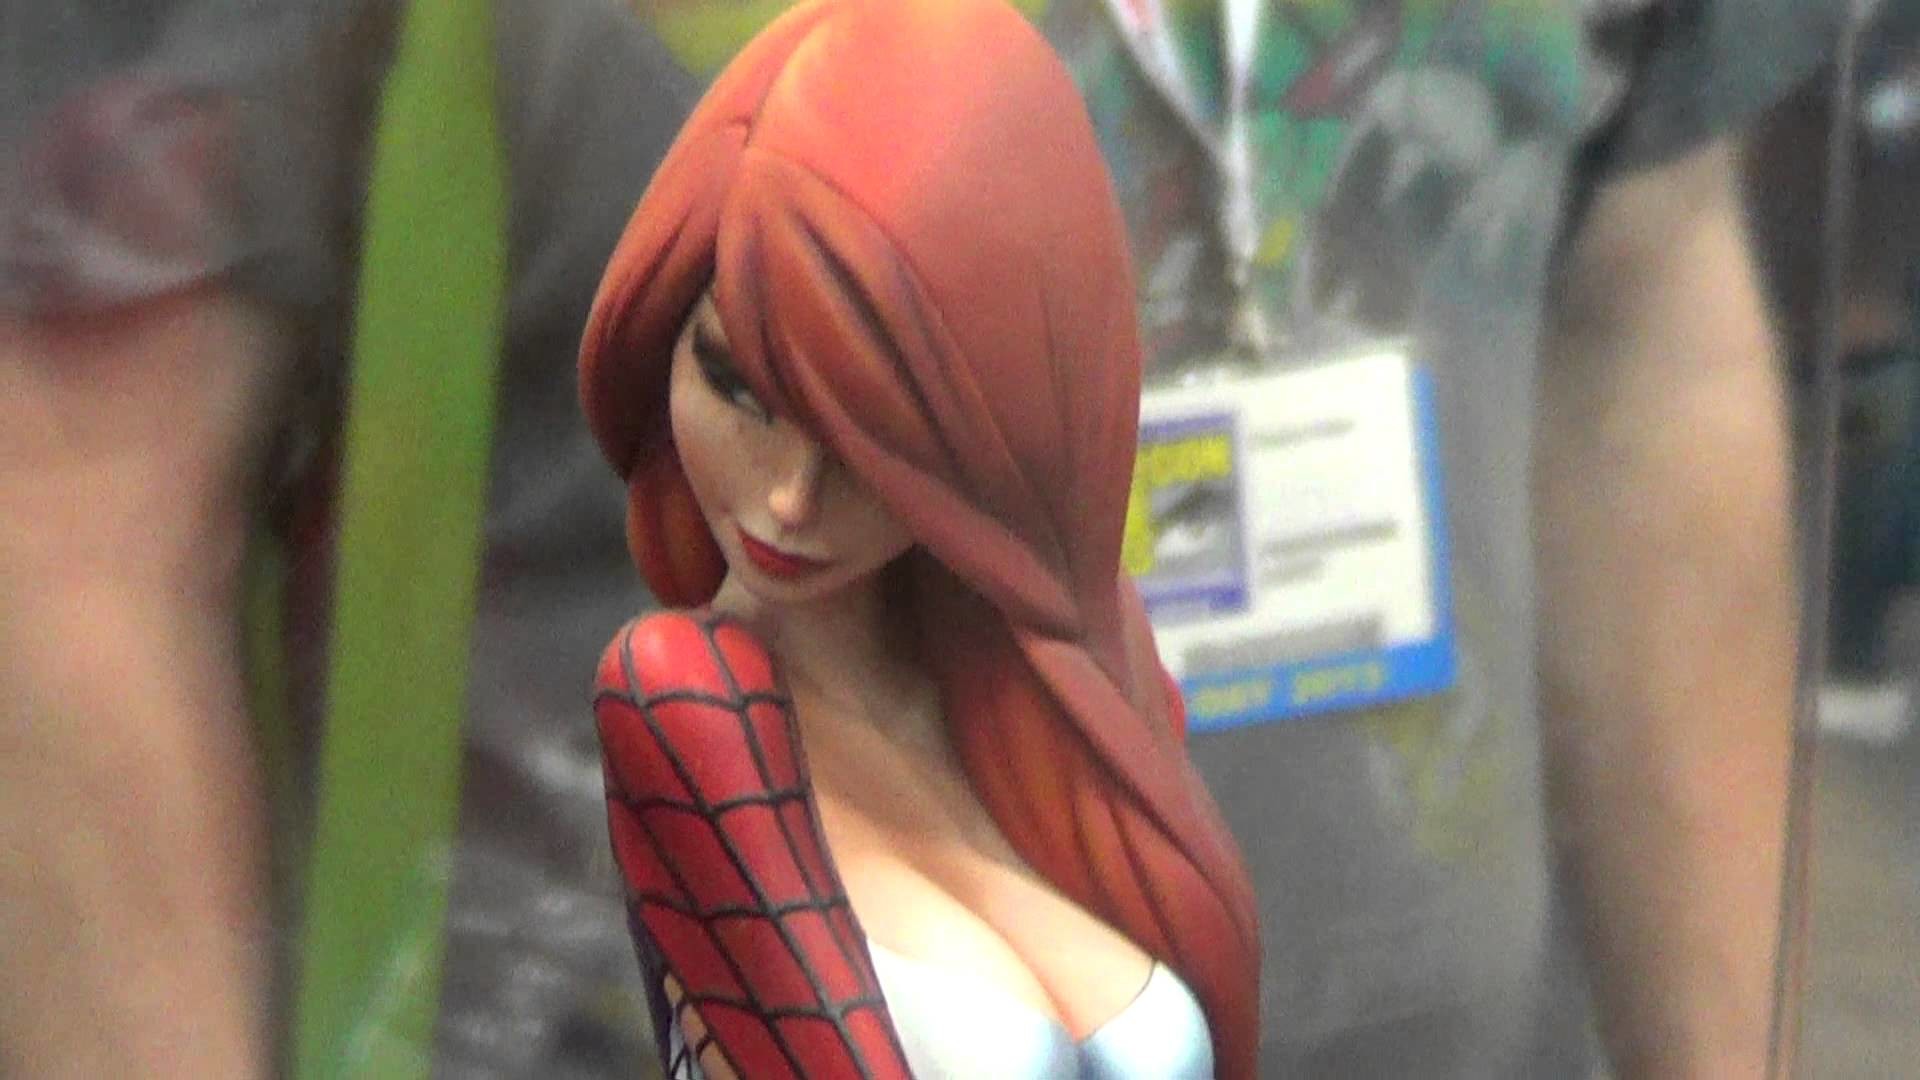 1920x1080 Spider-Man, Gwen Stacy, and Mary Jane J. Scott Campbell Sideshow  Collectibles Statues at SDCC 2013 - YouTube